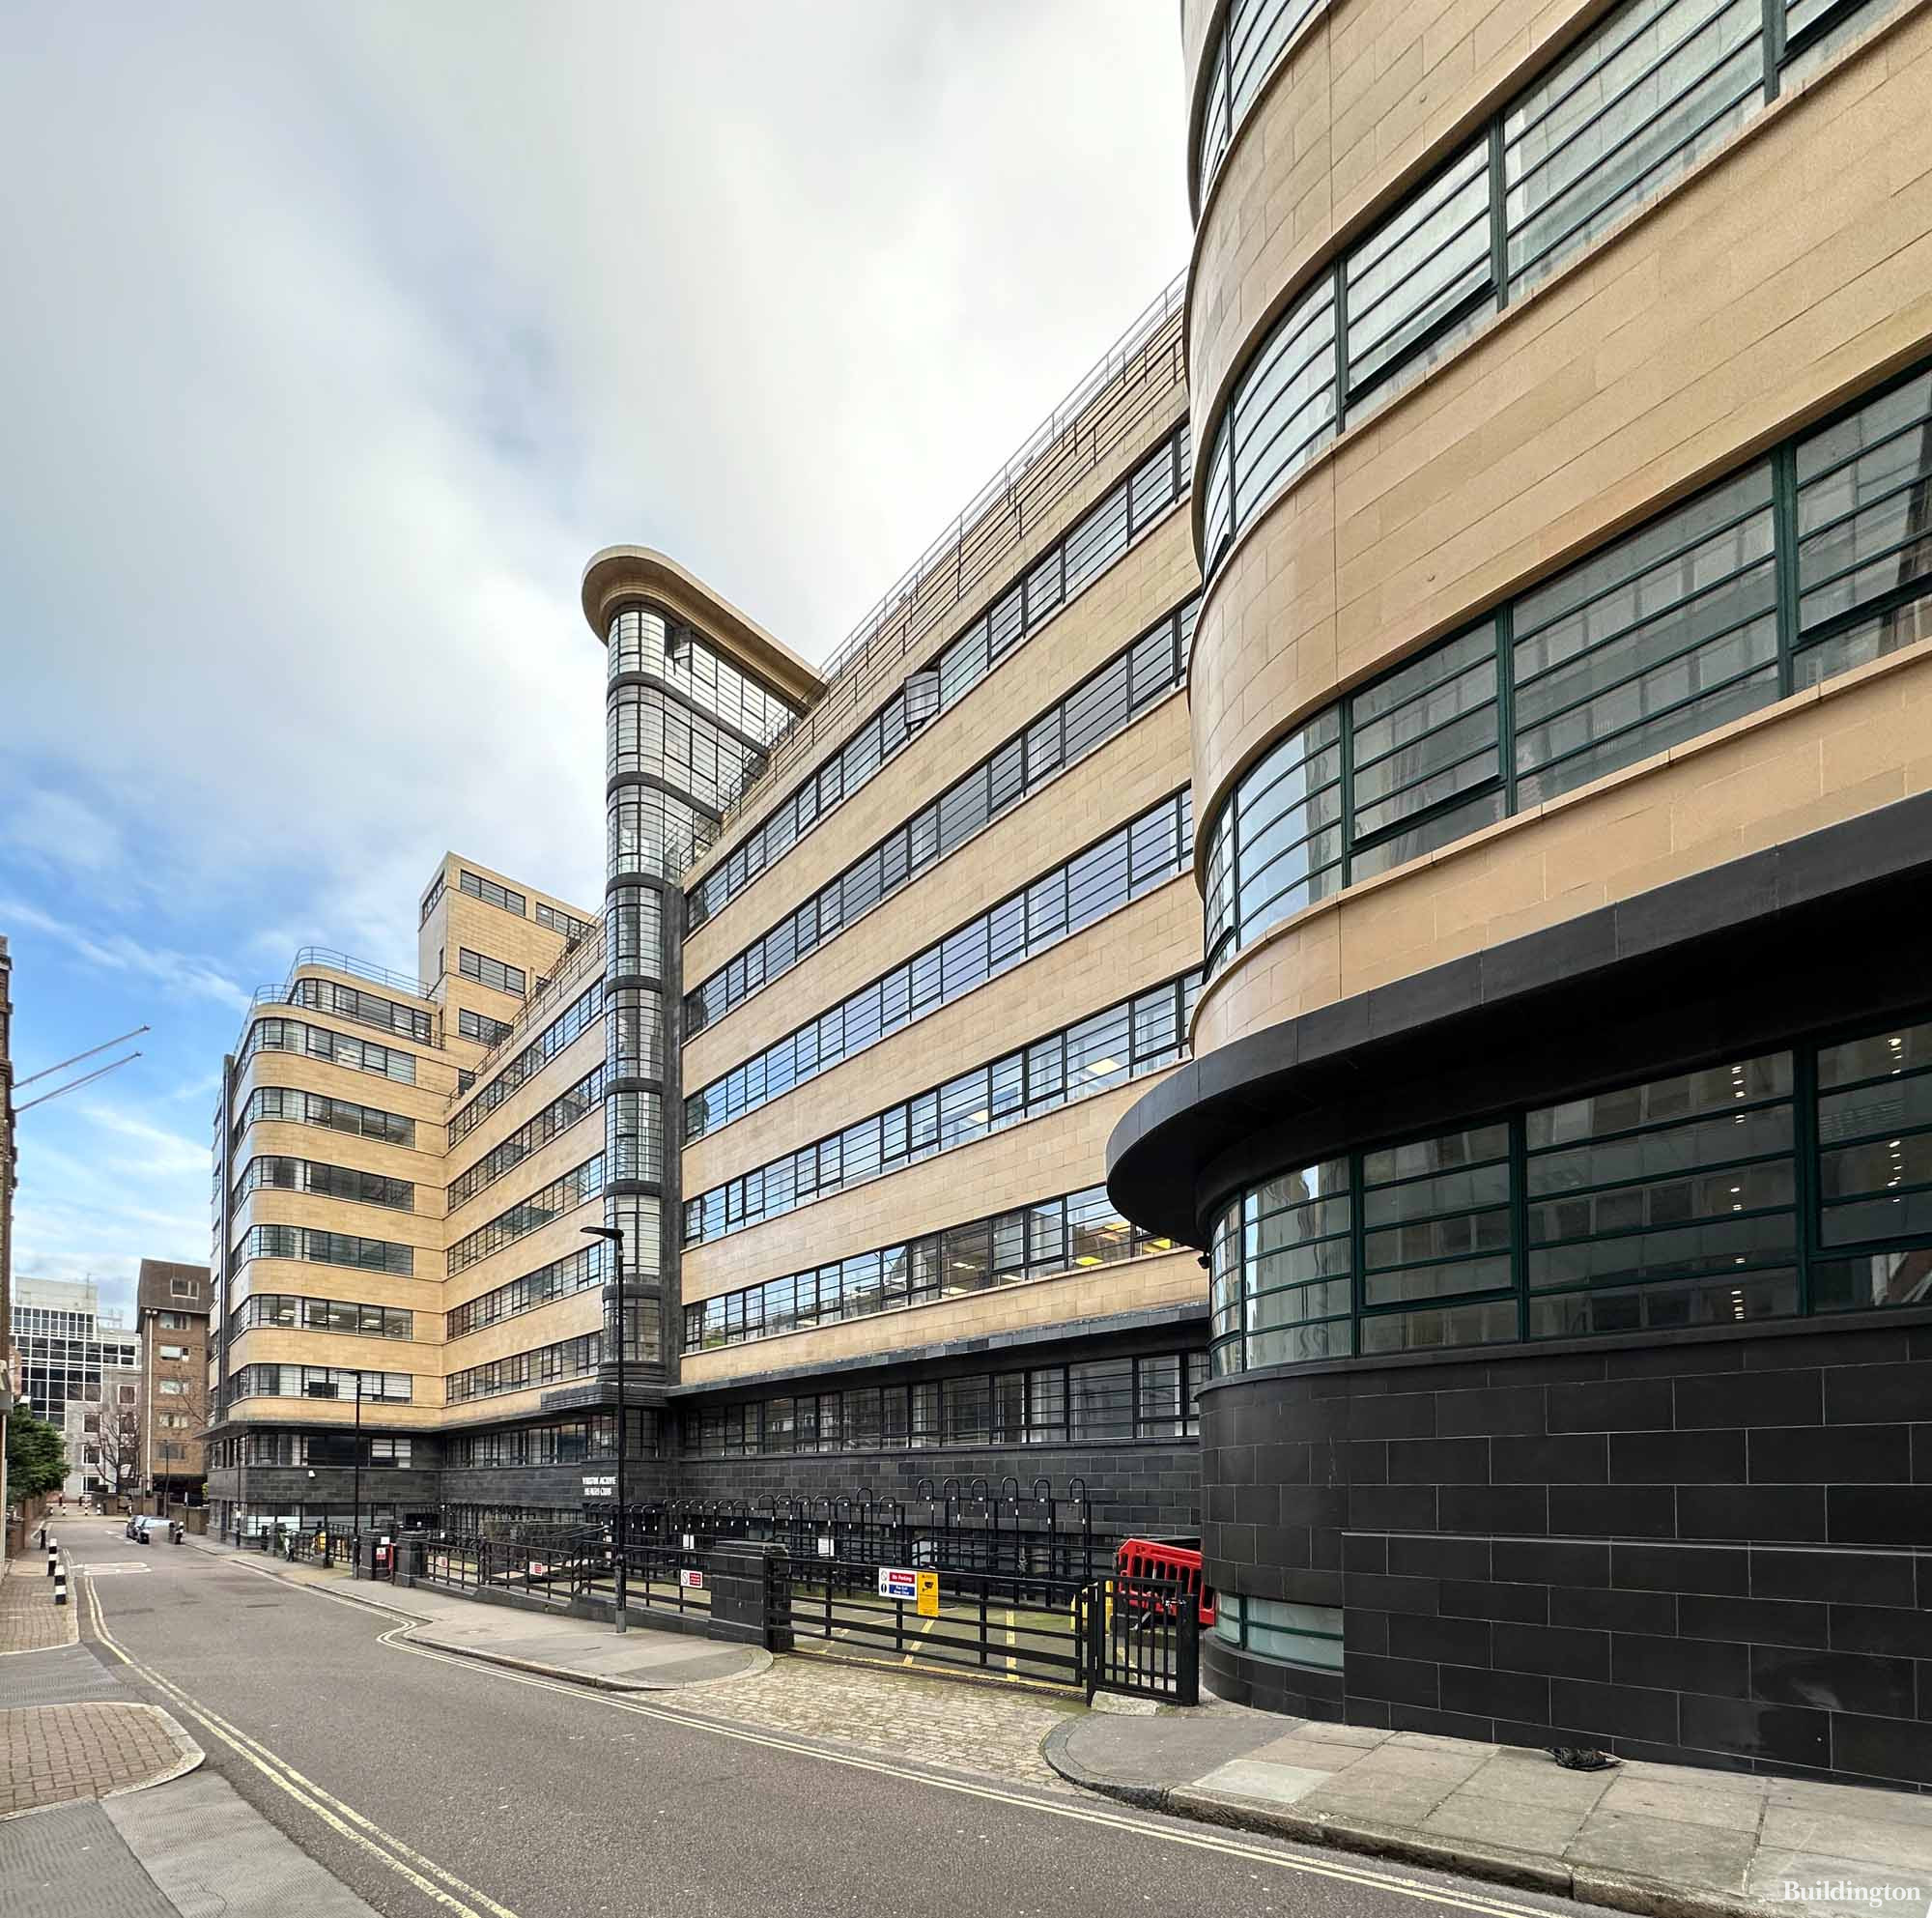 Ibex House on Minories in the City of London EC3